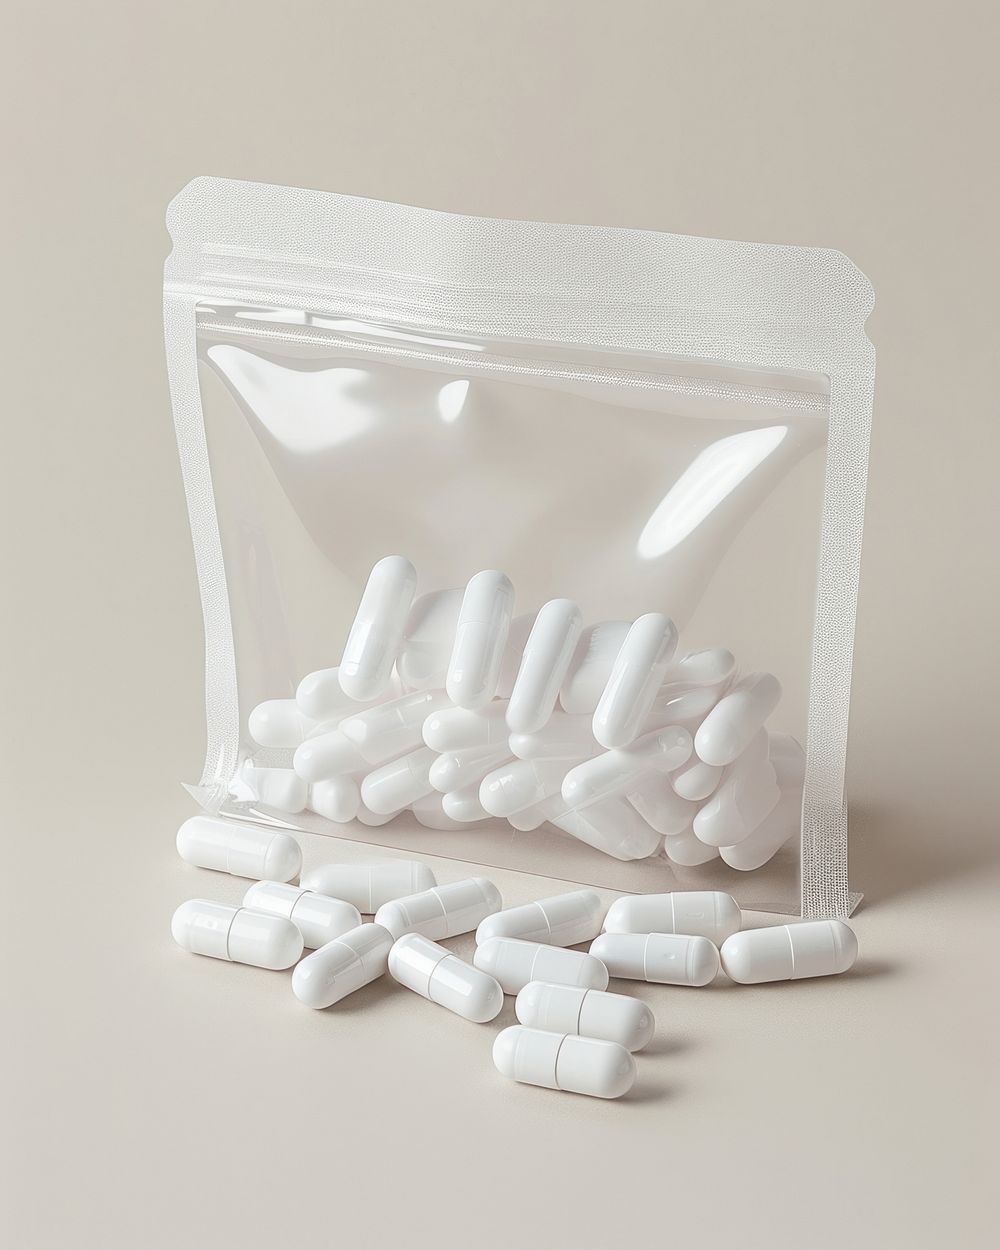 Pill white medication container.